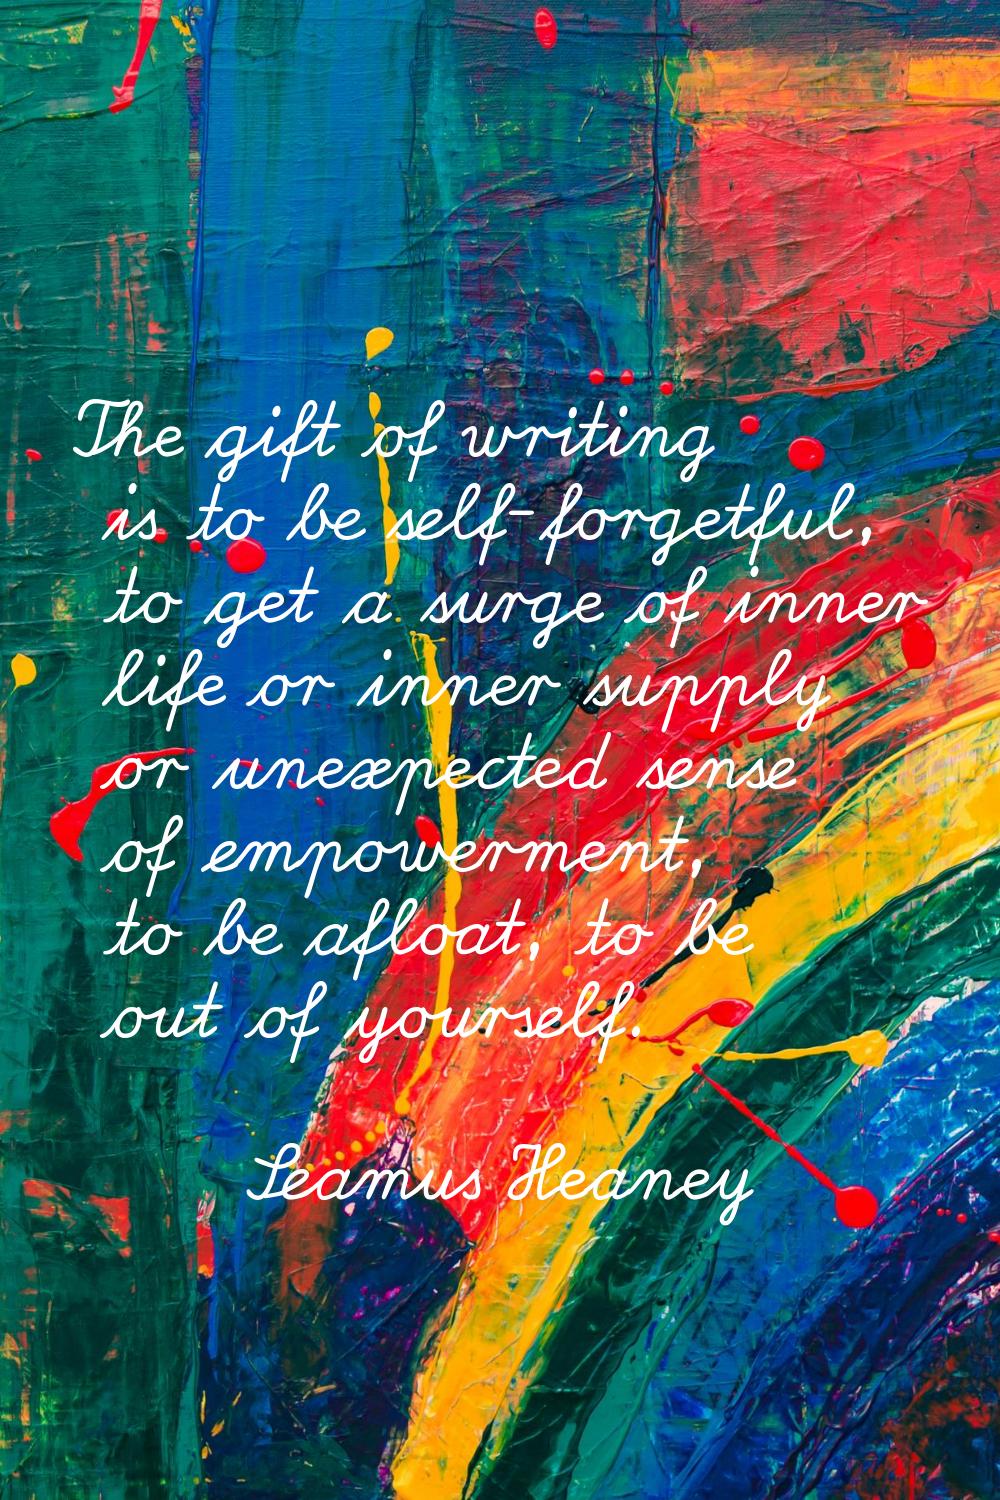 The gift of writing is to be self-forgetful, to get a surge of inner life or inner supply or unexpe